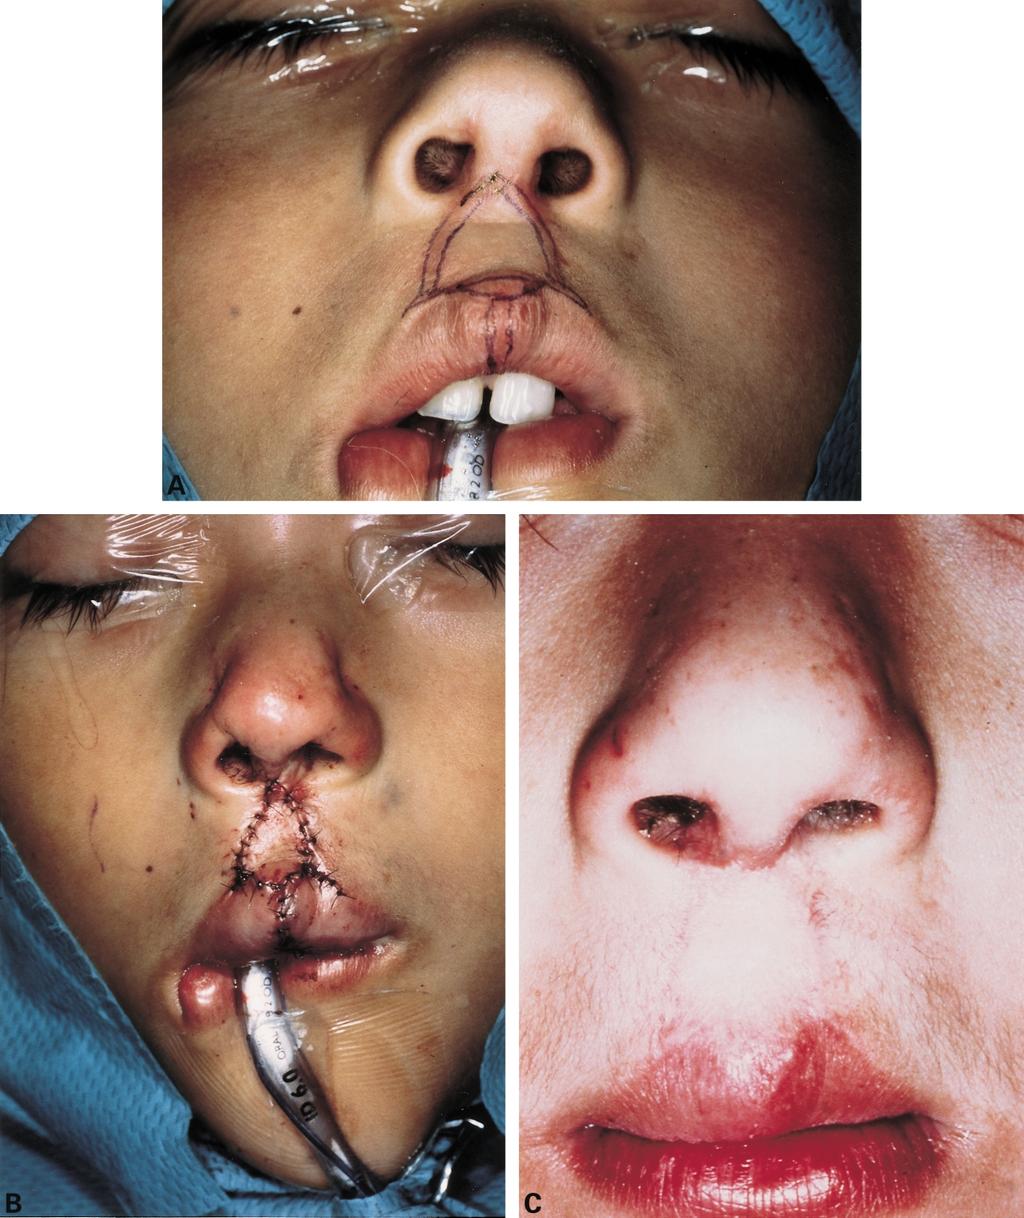 378 A. Takeshita et al. Fig. 8 Pre-operative design (A) and the appearance immediately after surgery (B). This indicates the appearance at 6 months after surgery (C).